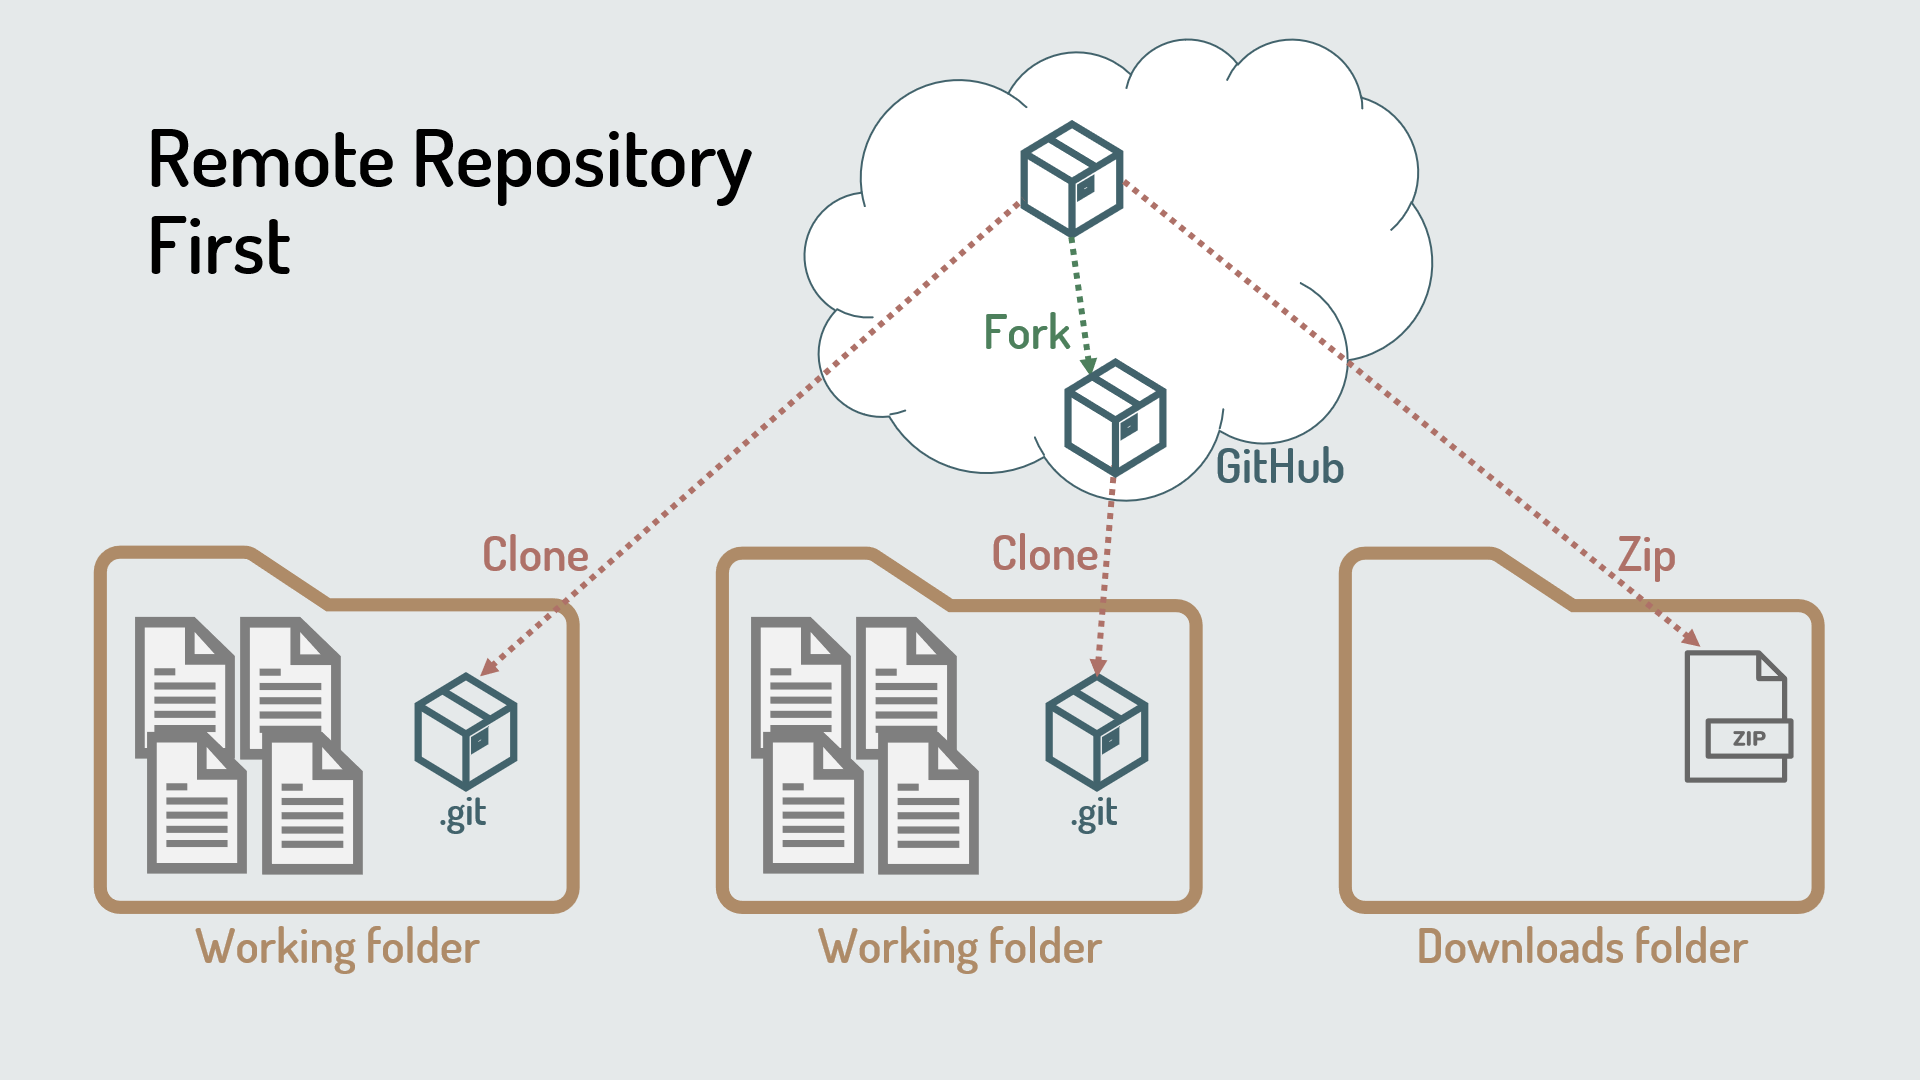 Three ways to get code from a remote repository: clone, fork and clone, zip.